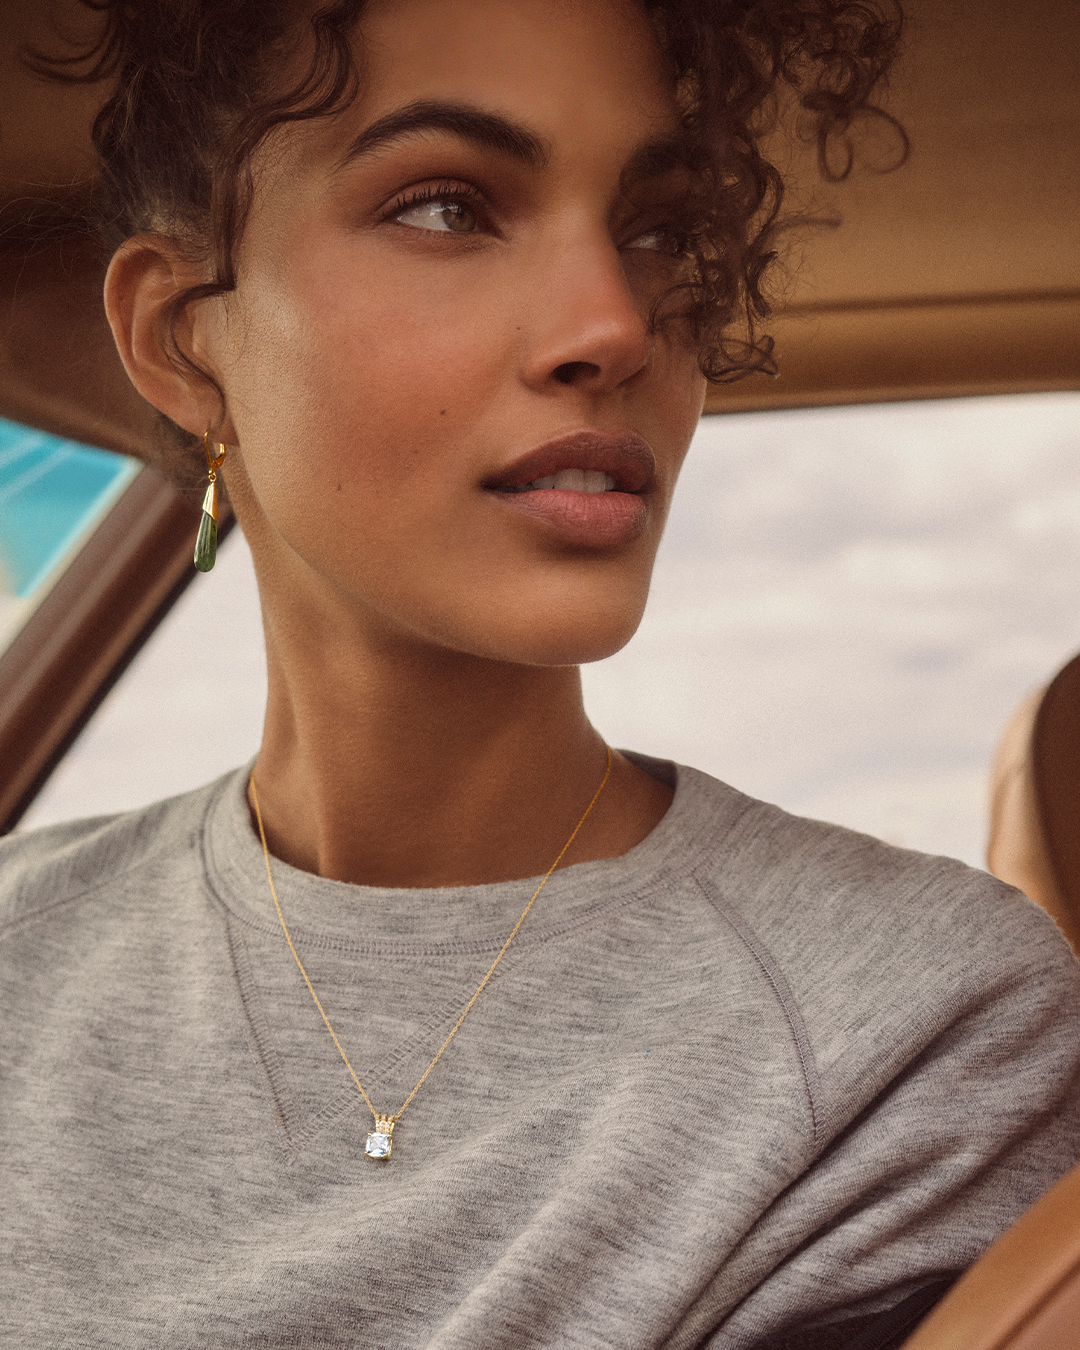 A woman sits in the car and shows off earrings and a necklace from Peoples Jewellers.